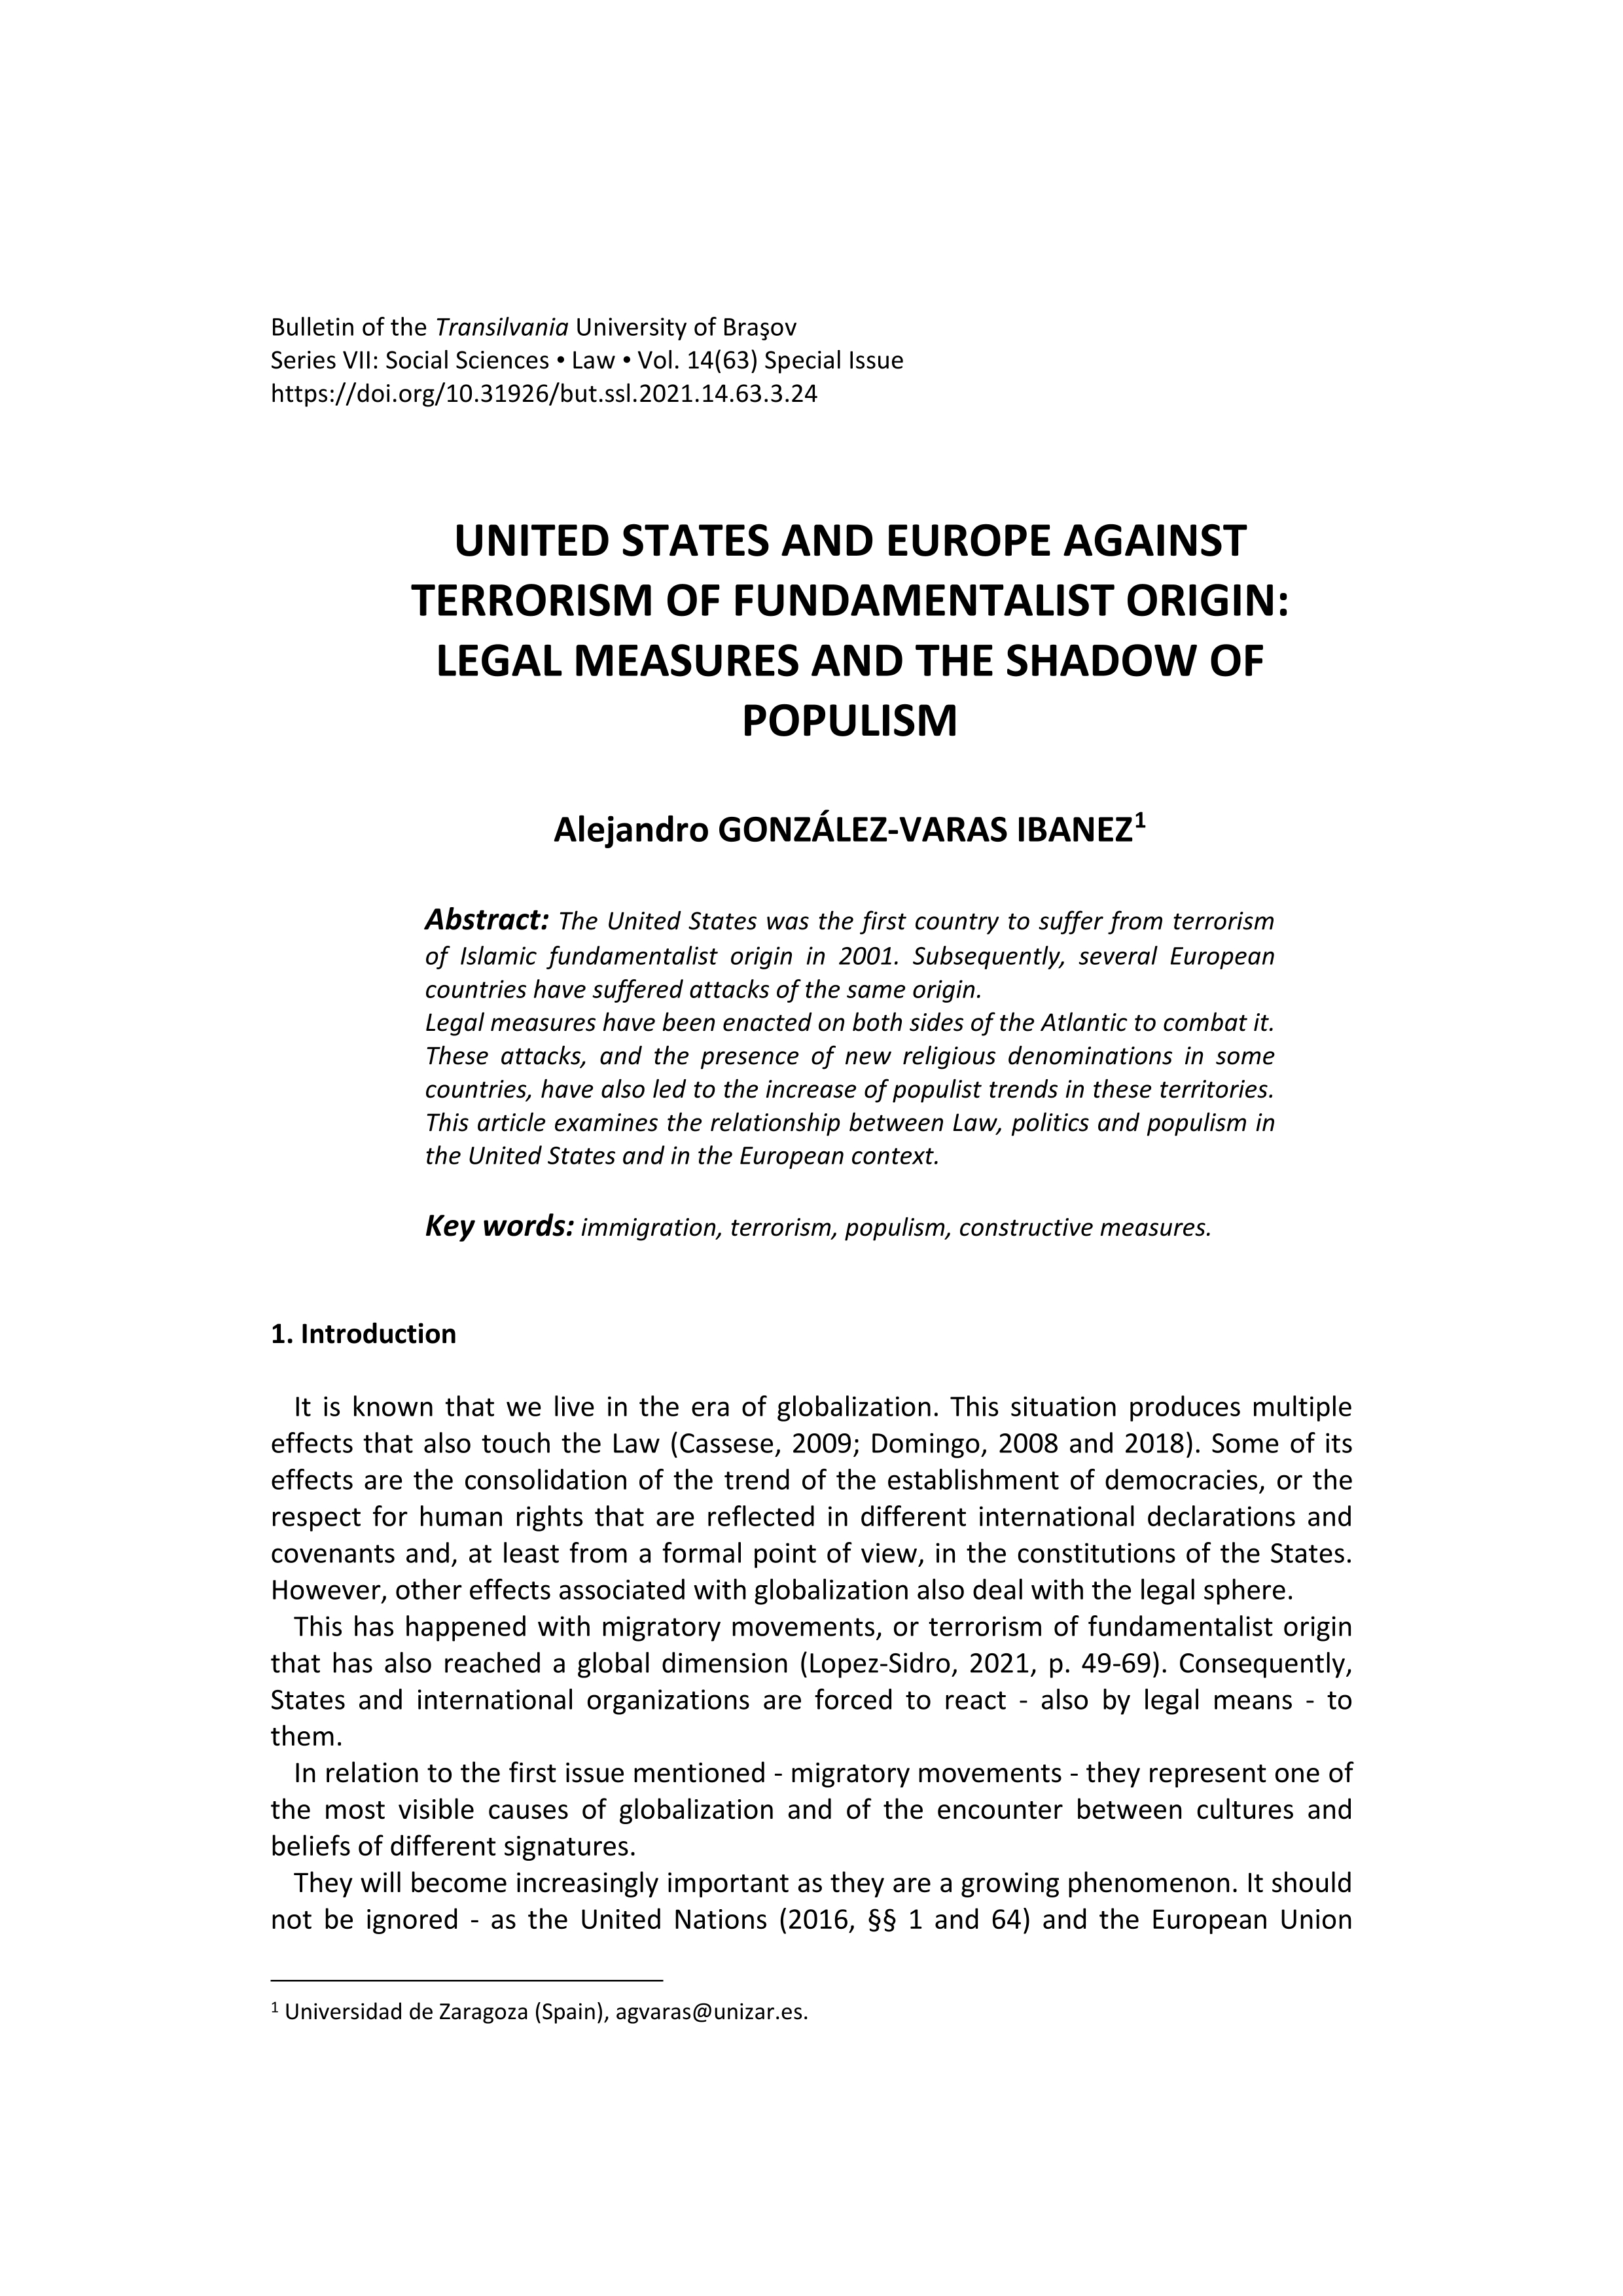 United States and Europe against Terrorism of Fundamentalist Origin: Legal Measures and the Shadow of Populism